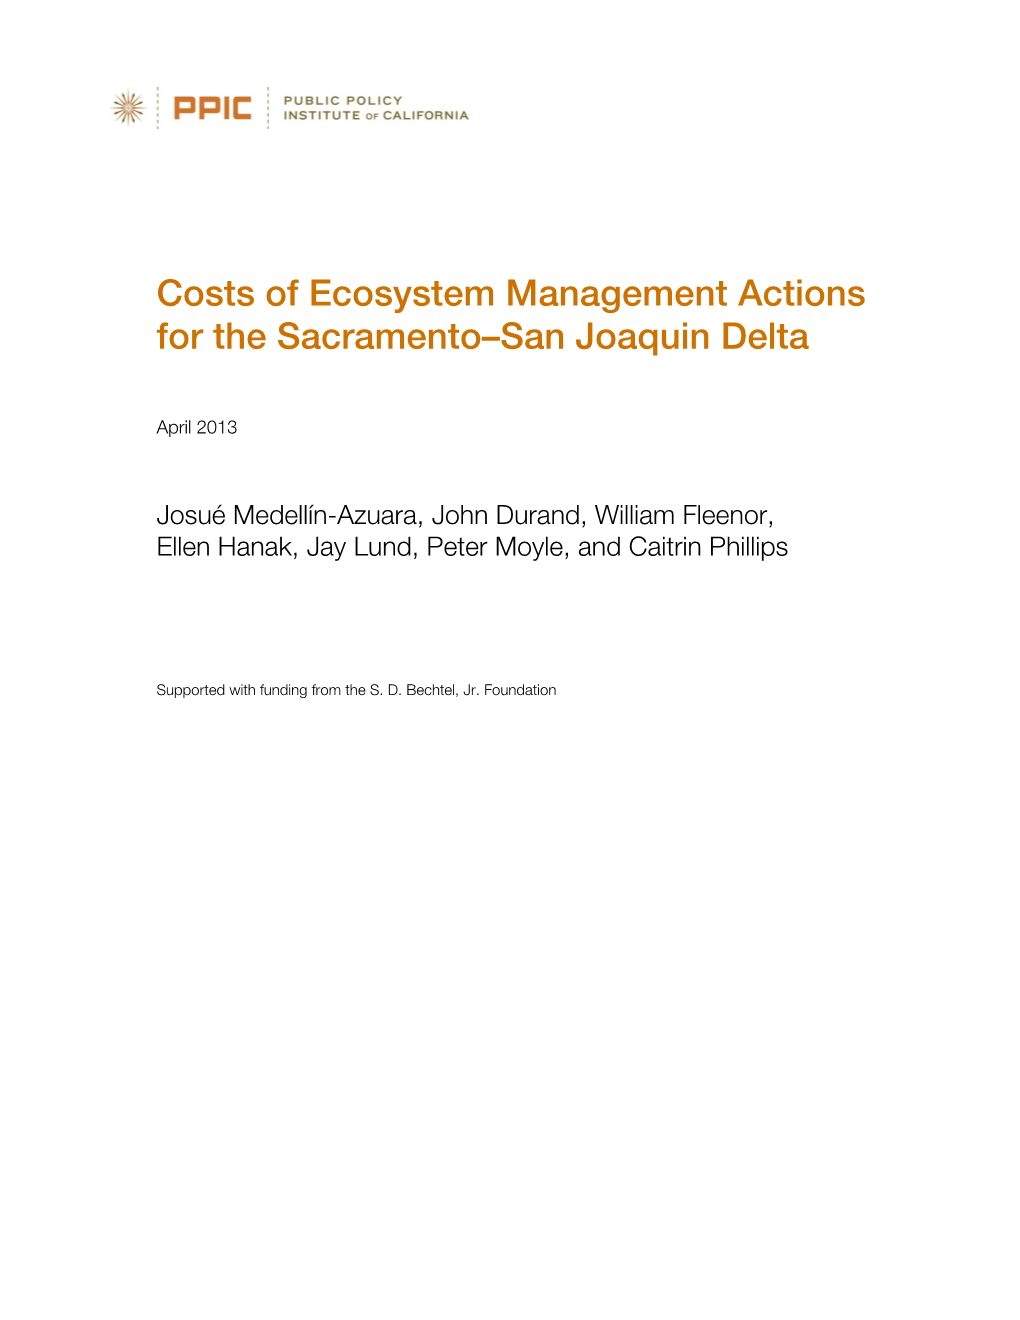 Costs of Ecosystem Management Actions for the Sacramento-San Joaquin Delta